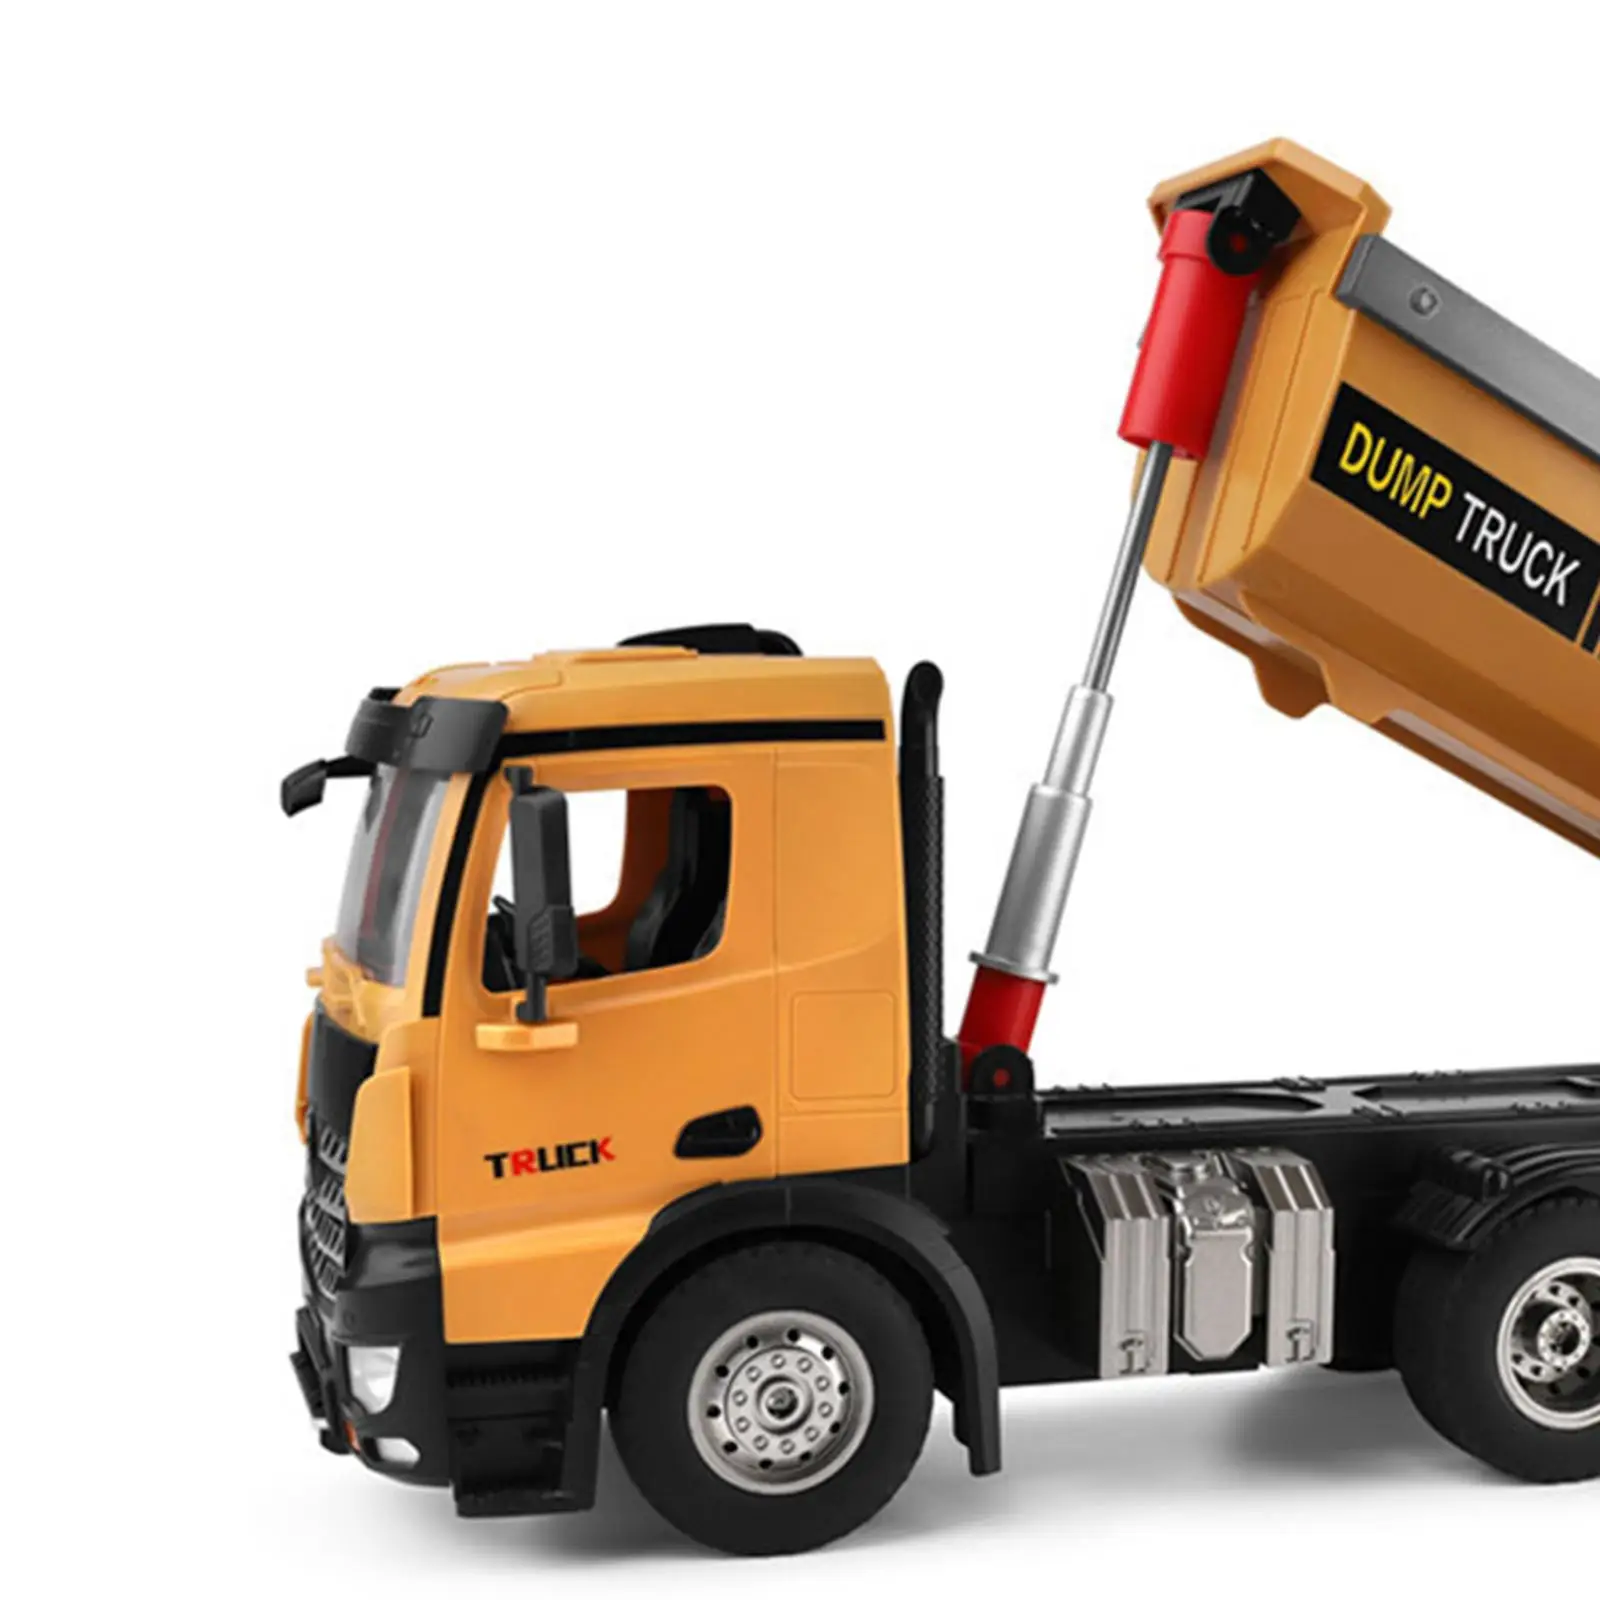  14600 Rechargeable Remote Controlled Dump Truck Toy for Kids